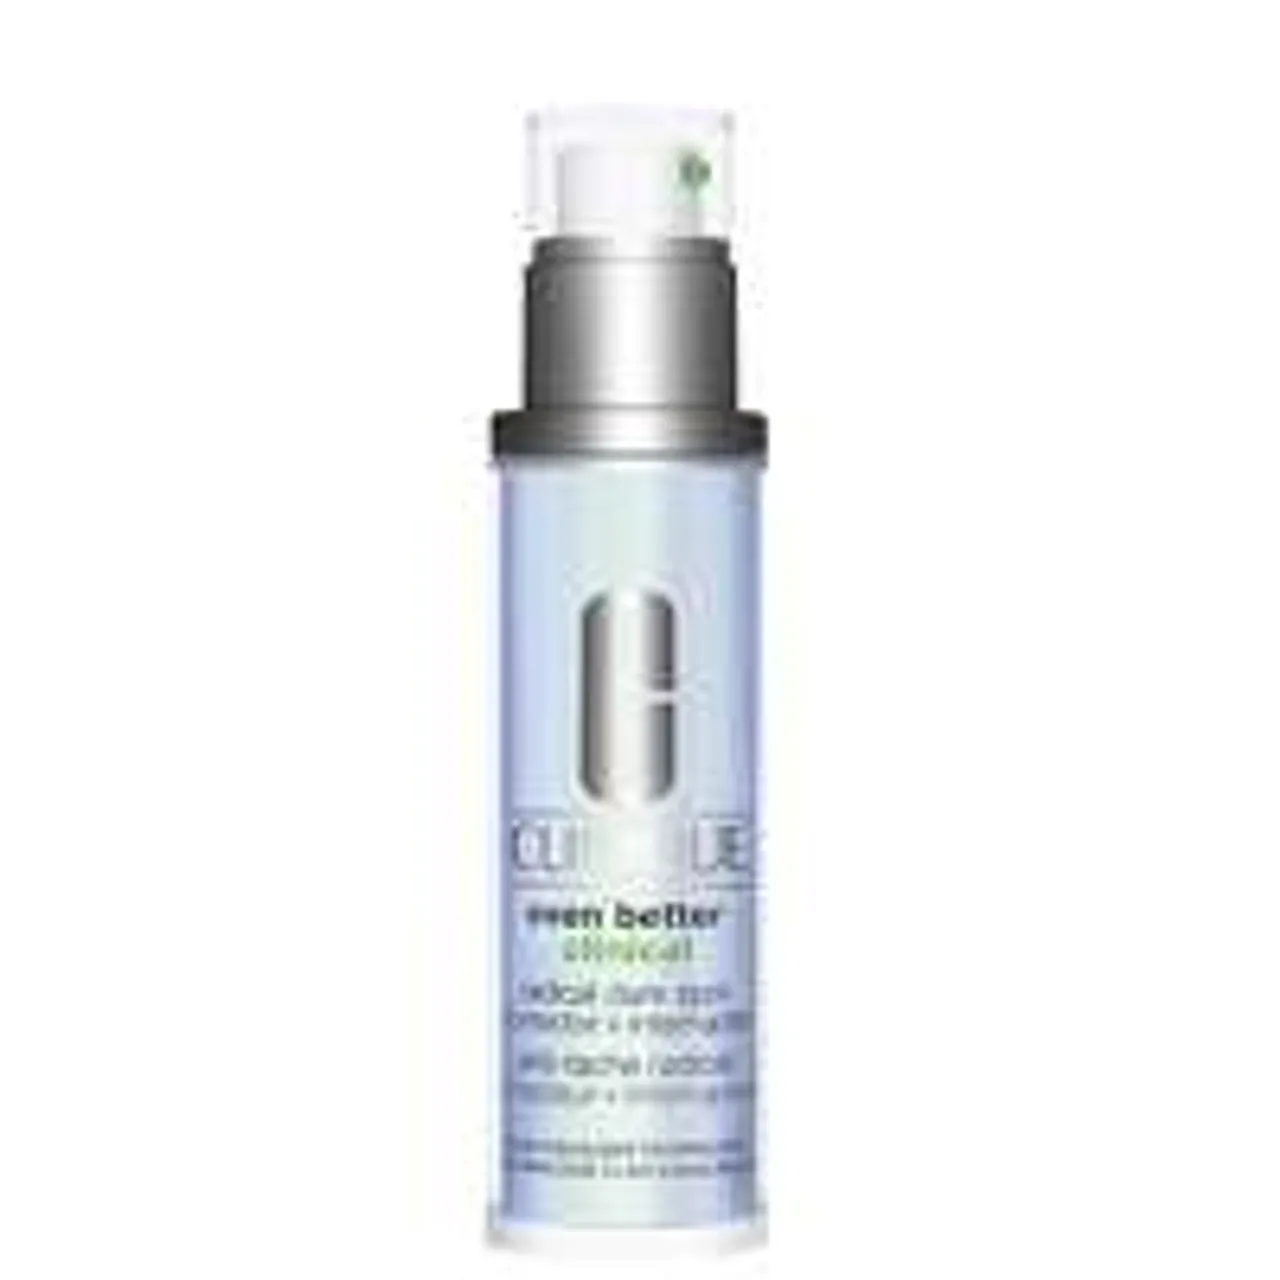 Clinique Serums and Treatments Even Better Clinical Radical Dark Spot Corrector and Interrupter 50ml / 1.7 fl.oz.